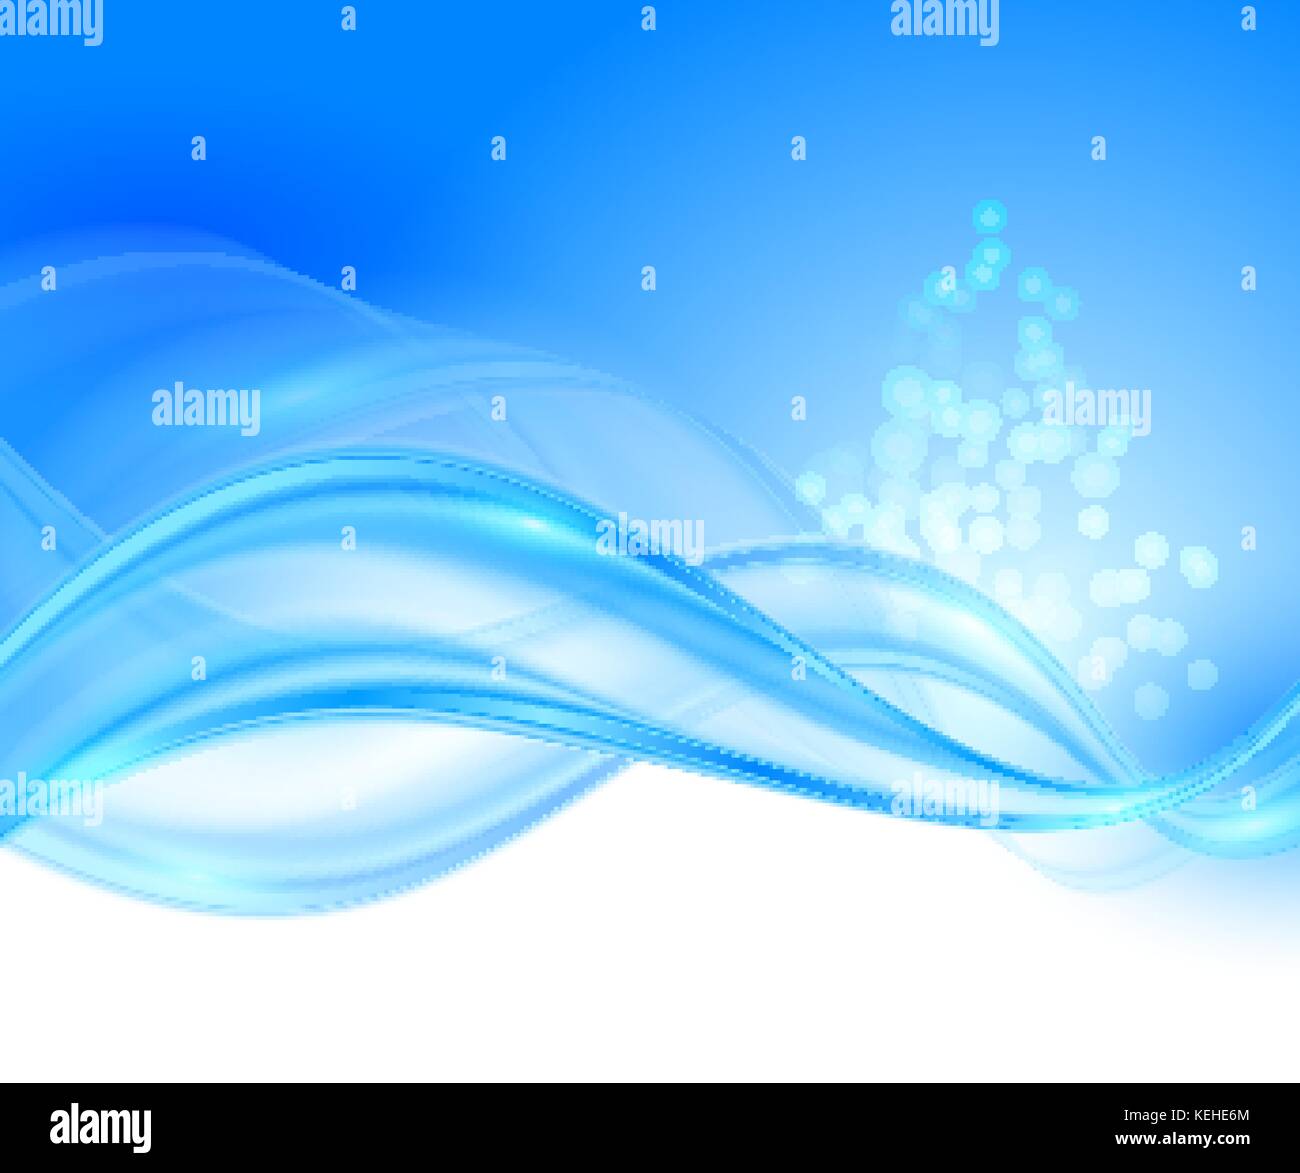 Winter and Christmas background Stock Vector